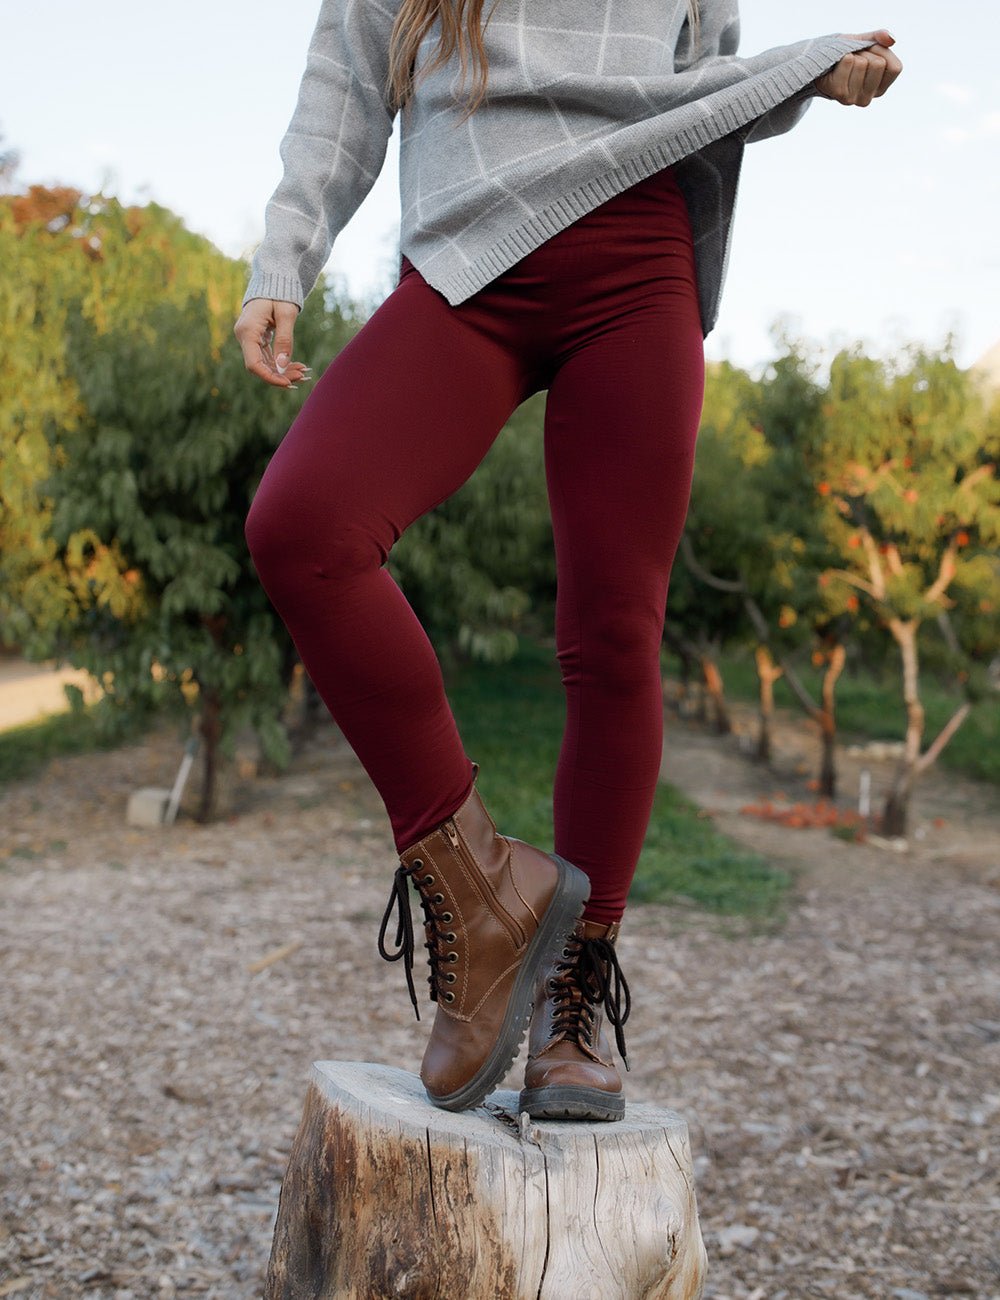 Simple Addiction Leggings Red - $9 - From Peyton